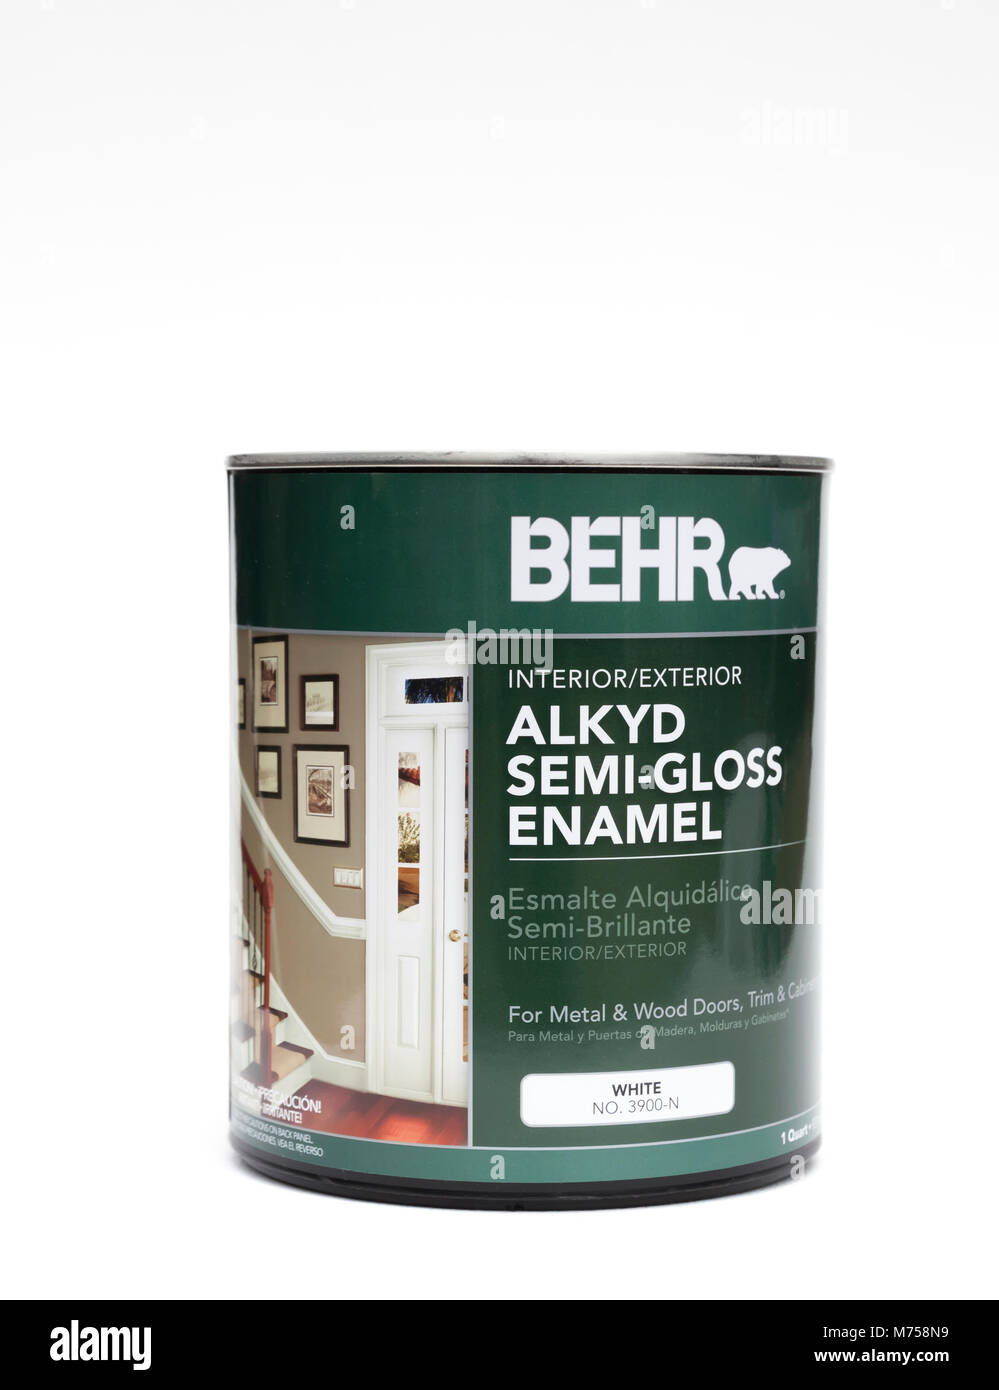 Behr Alkyd Semi Gloss Enamel Paint Dry Time View Painting